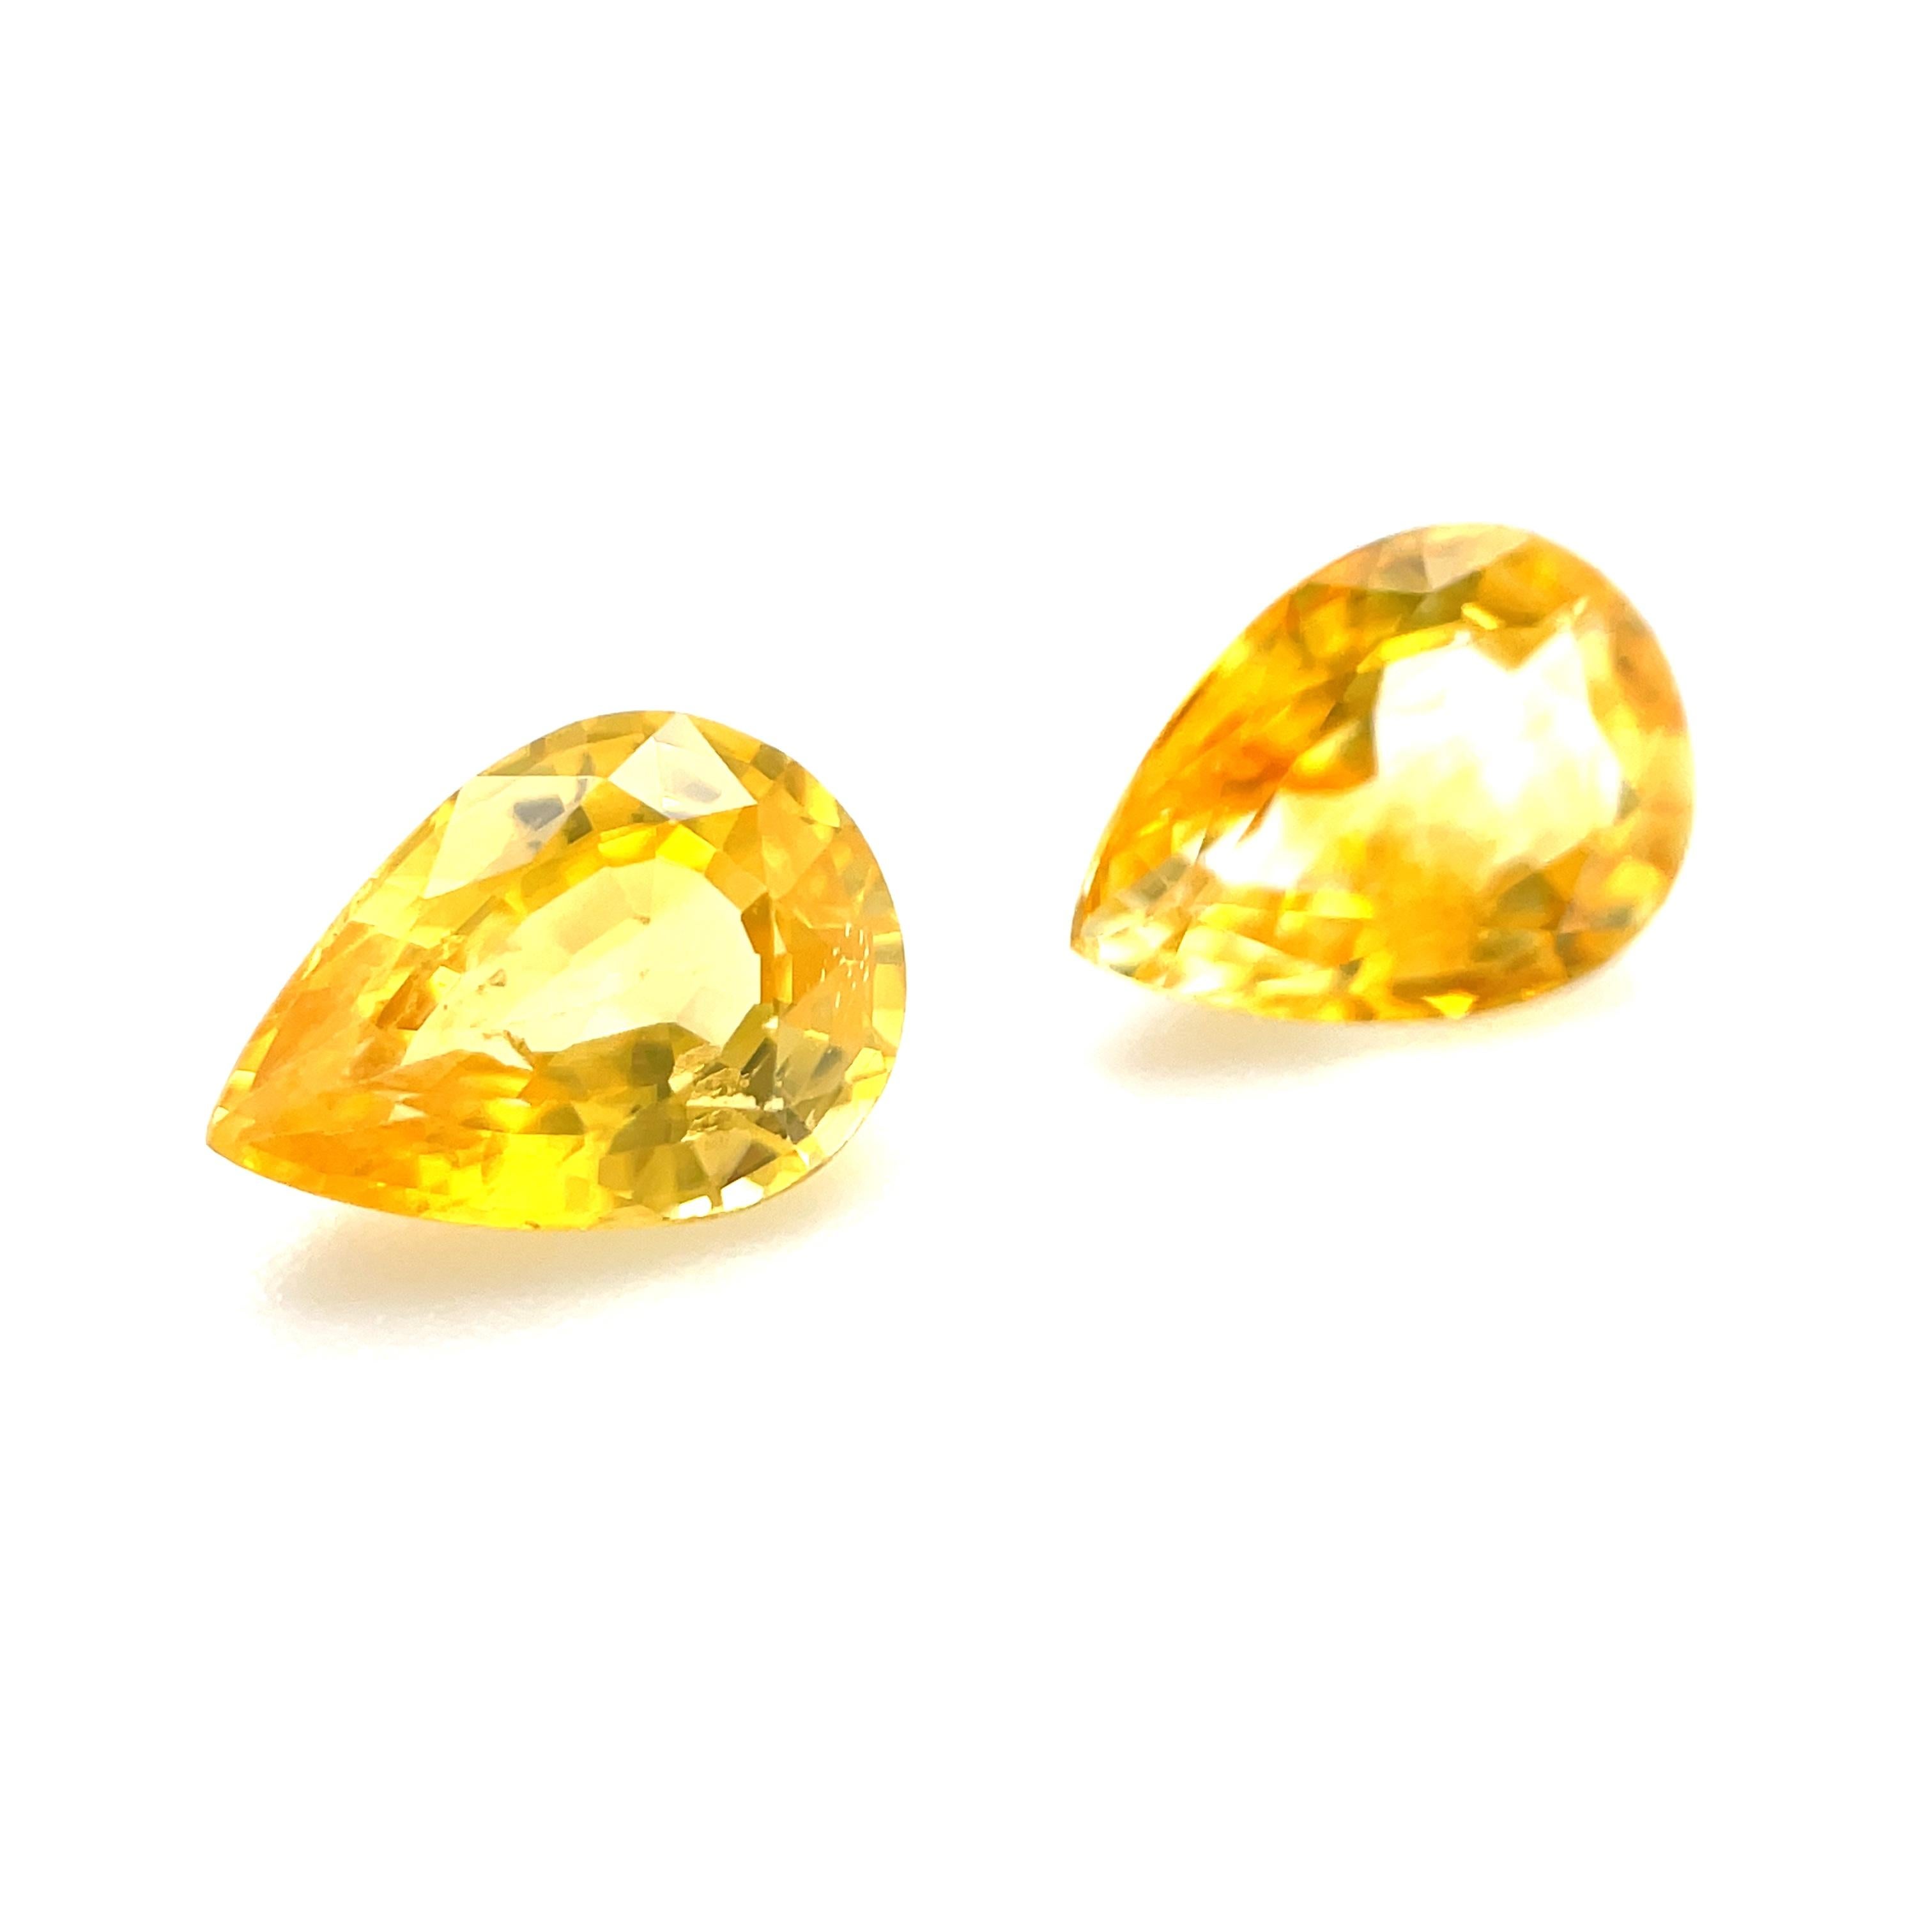 This beautifully matched pair of lemon drop yellow sapphires will make a gorgeous pair of earrings! Weighing 1.70 carats total, they have bright, lemon yellow color with rich golden highlights. They are eye clean and have lovely proportions that